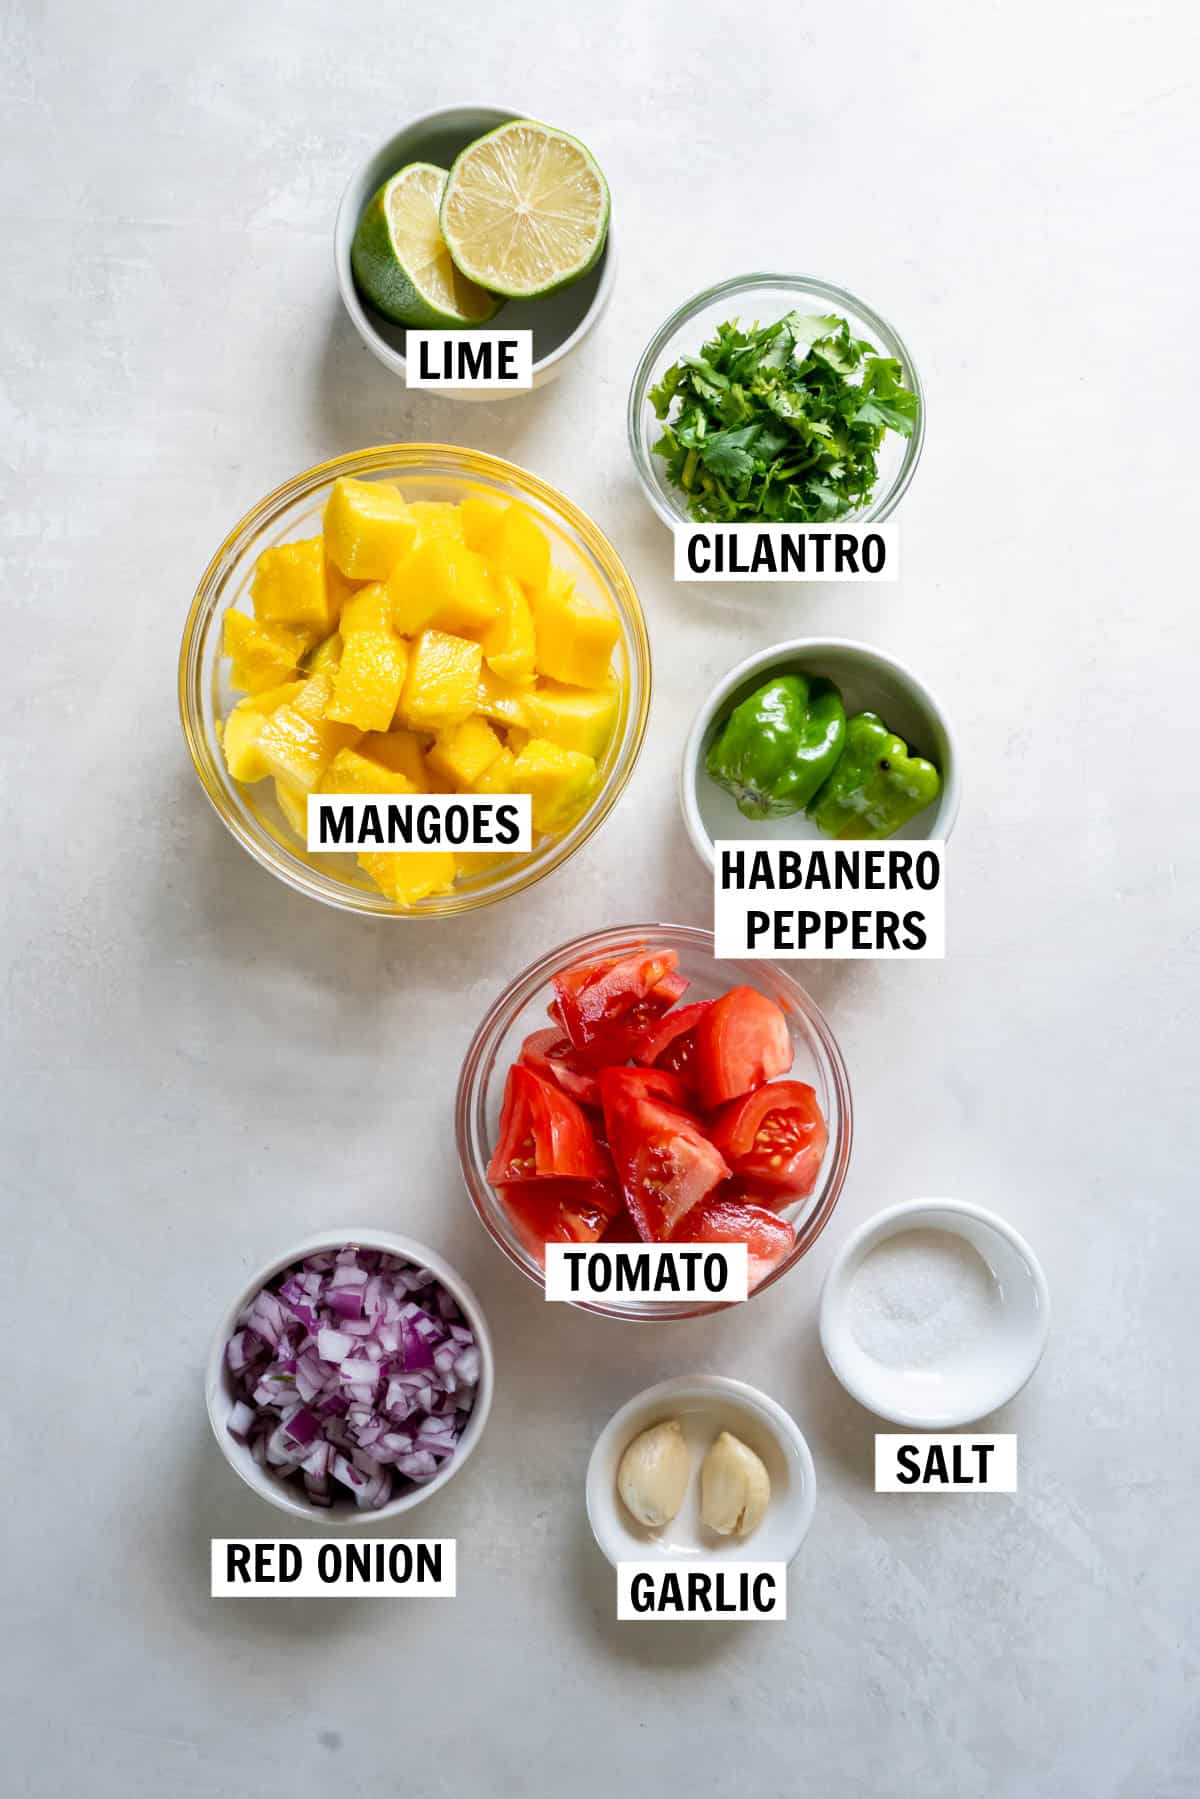 All of the ingredients for mango habanero salsa in clear bowls on a white countertop including chopped mangoes, tomato, habanero peppers, lime, red onion, garlic, cilantro and salt.